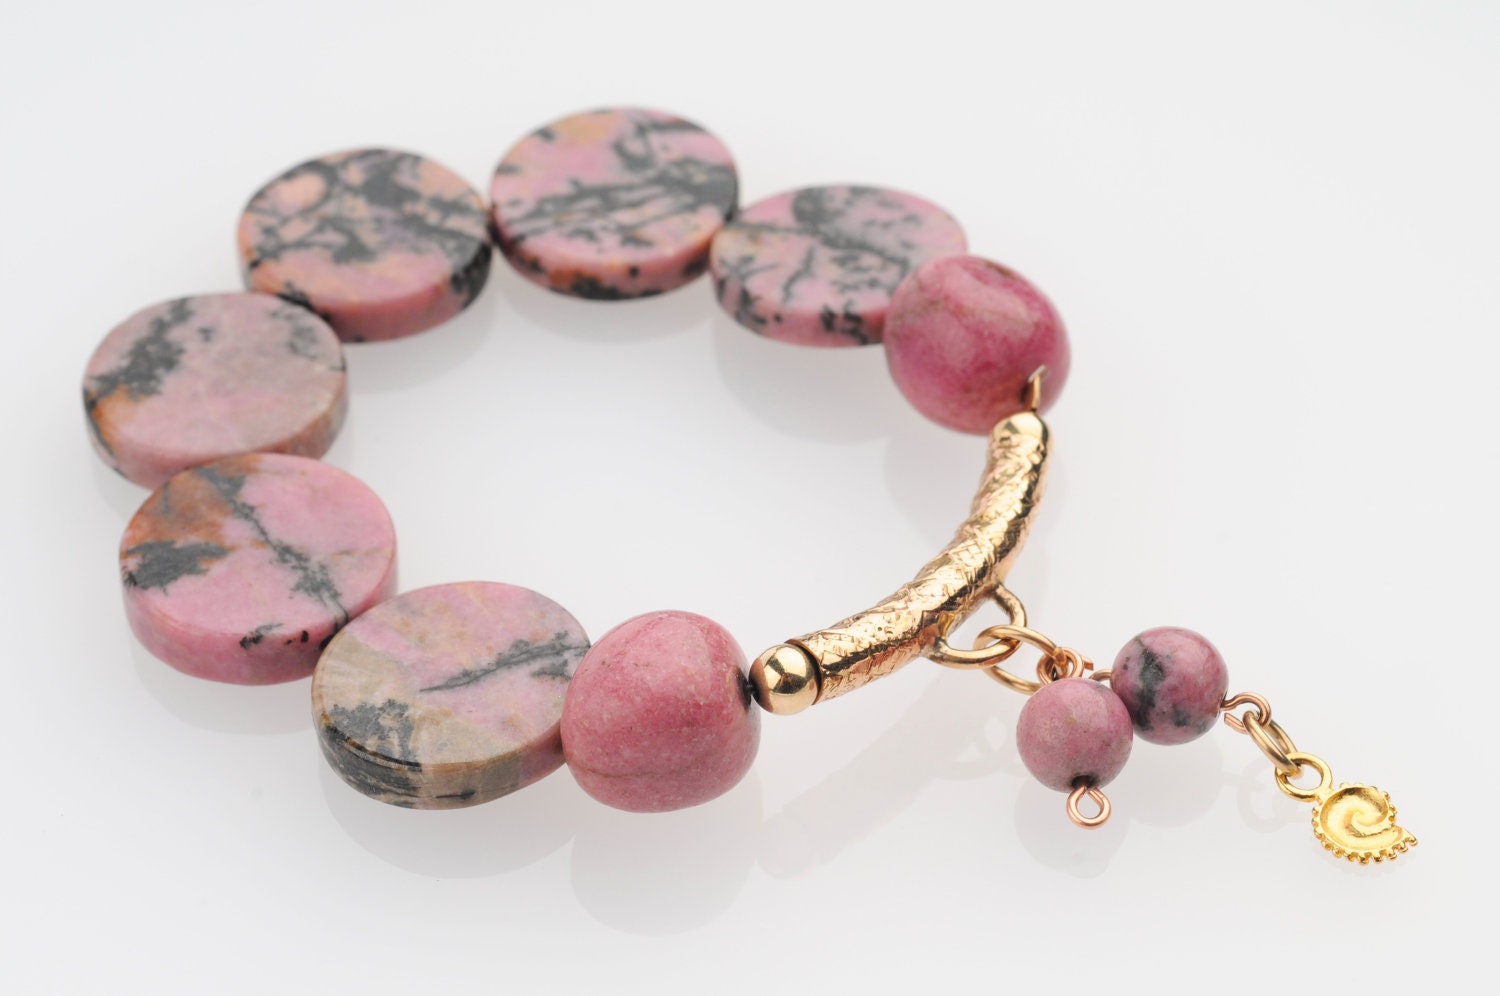 Bracelet with Pink and Grey Rhodonite and a Charm - "Rose & Gold Circle"